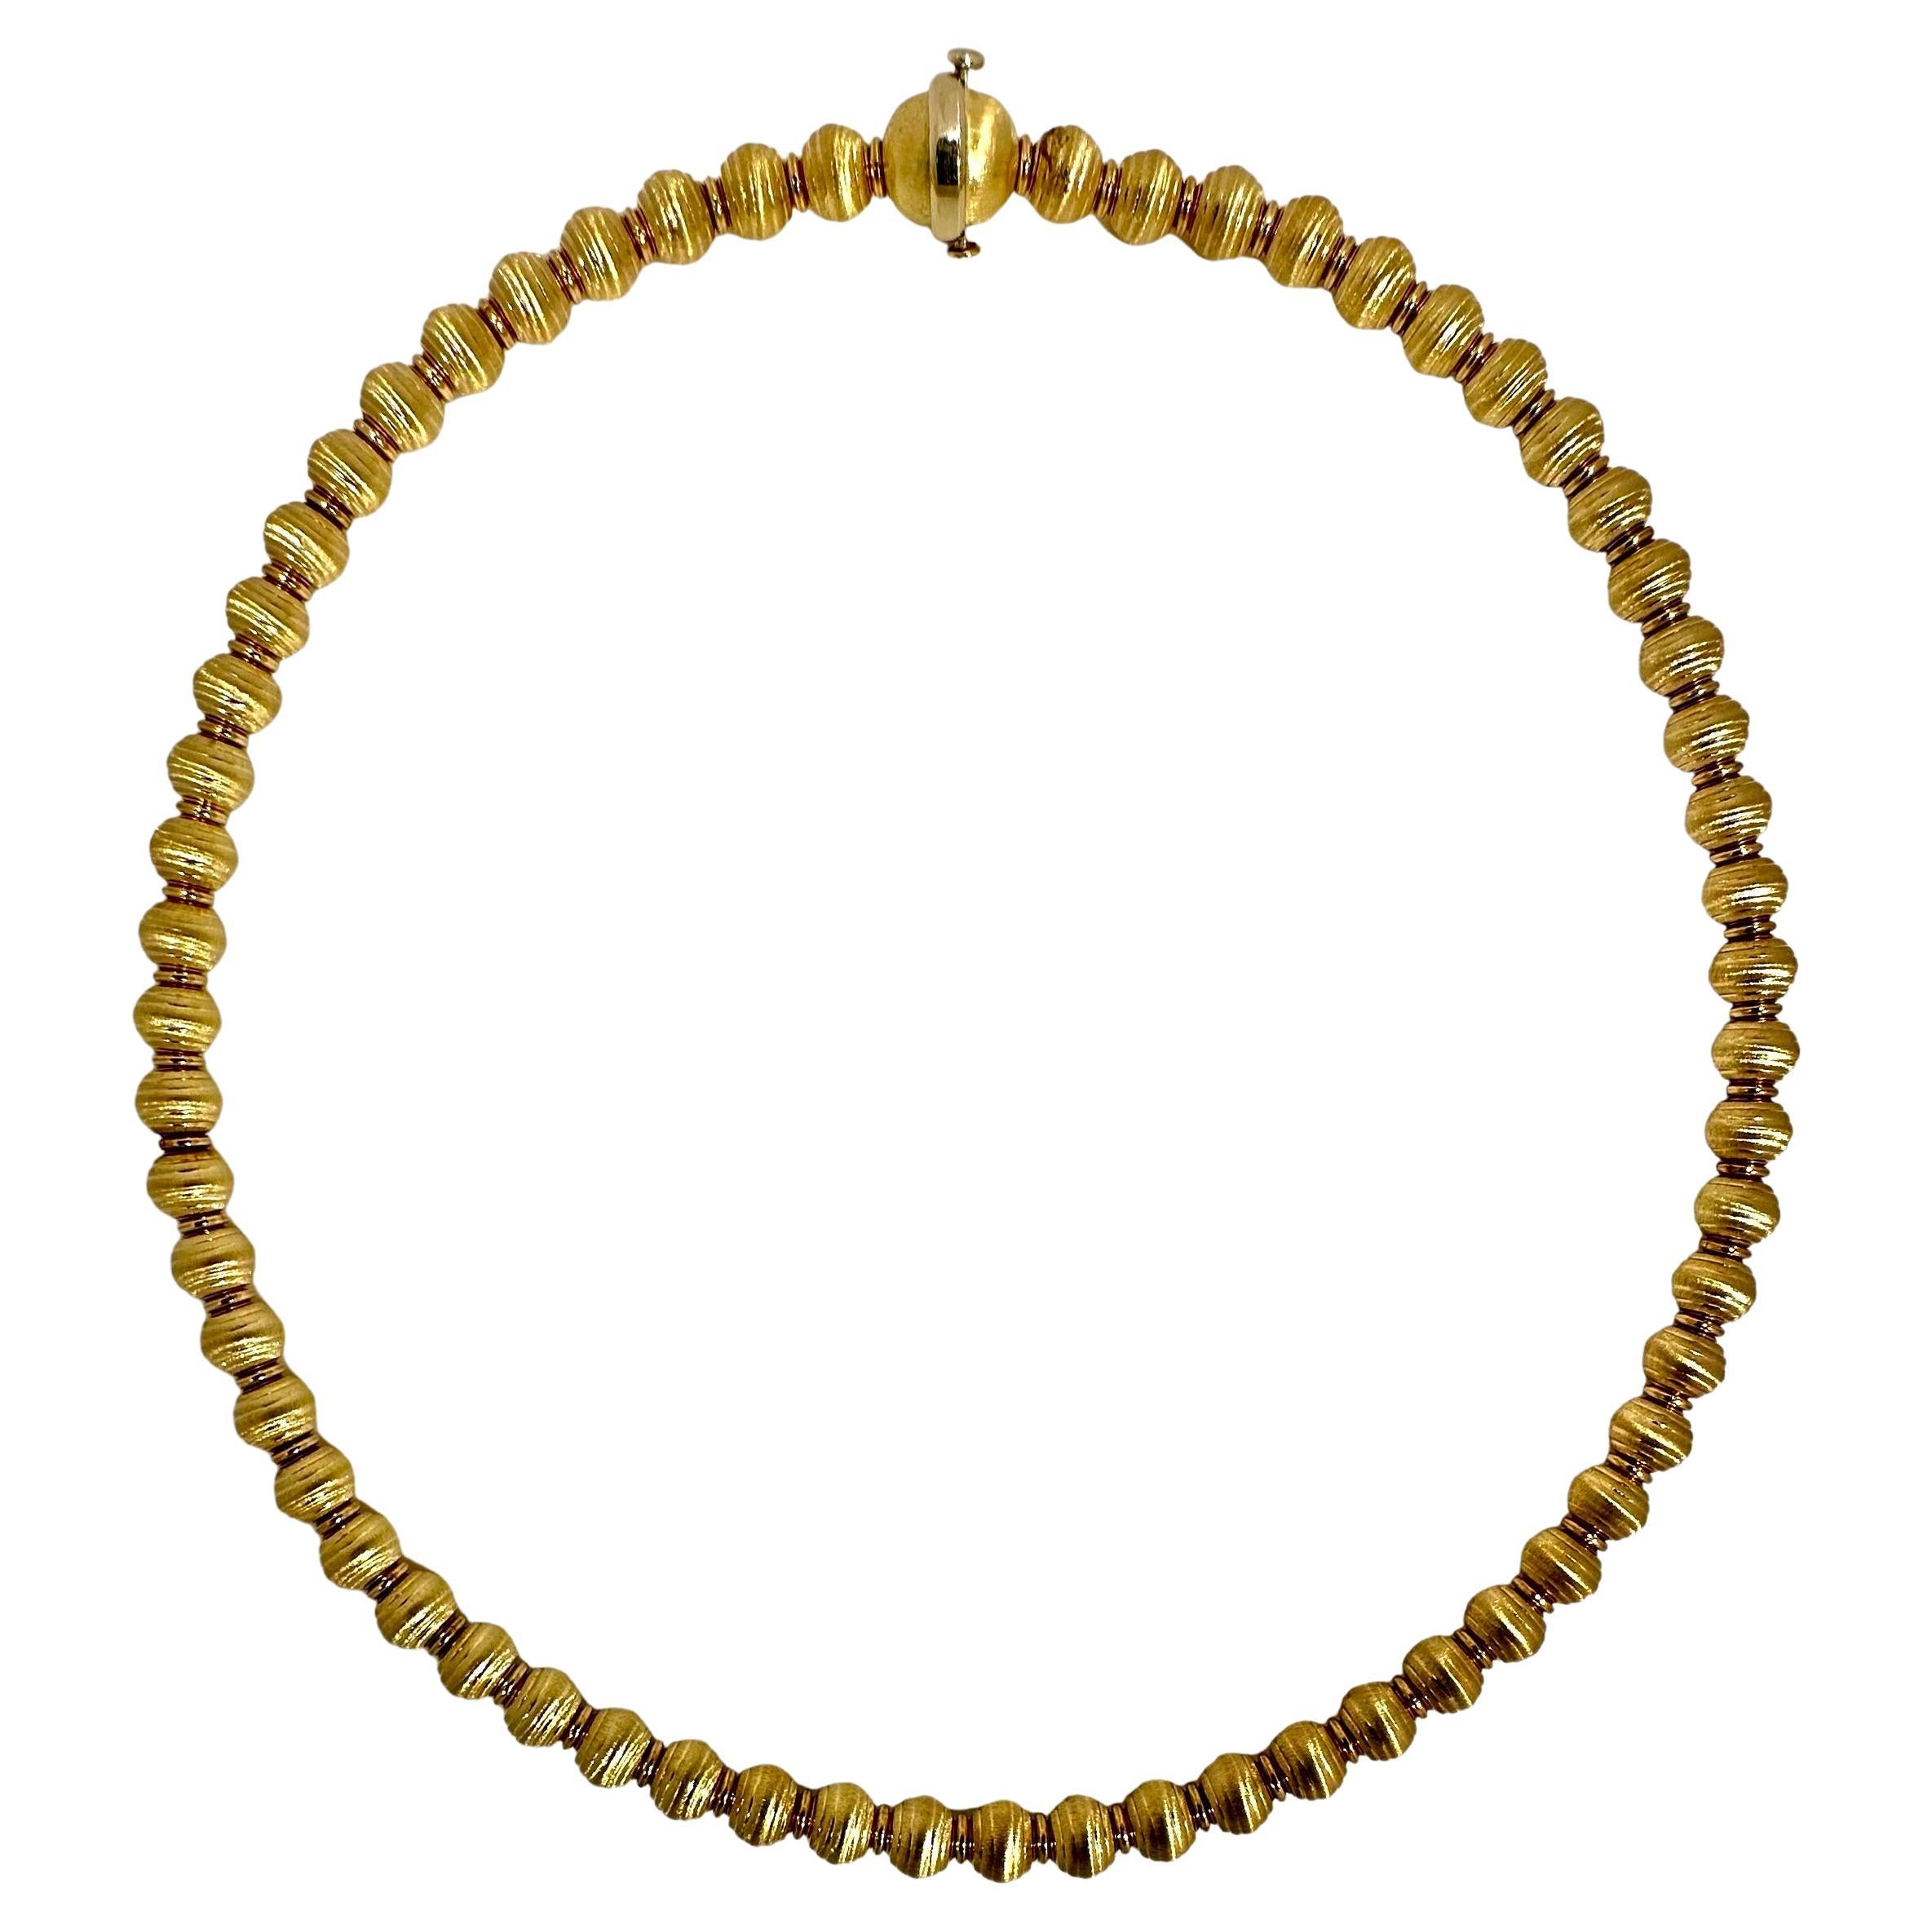 Precision Crafted 14k Yellow Gold Contemporary Italian Choker Length Necklace